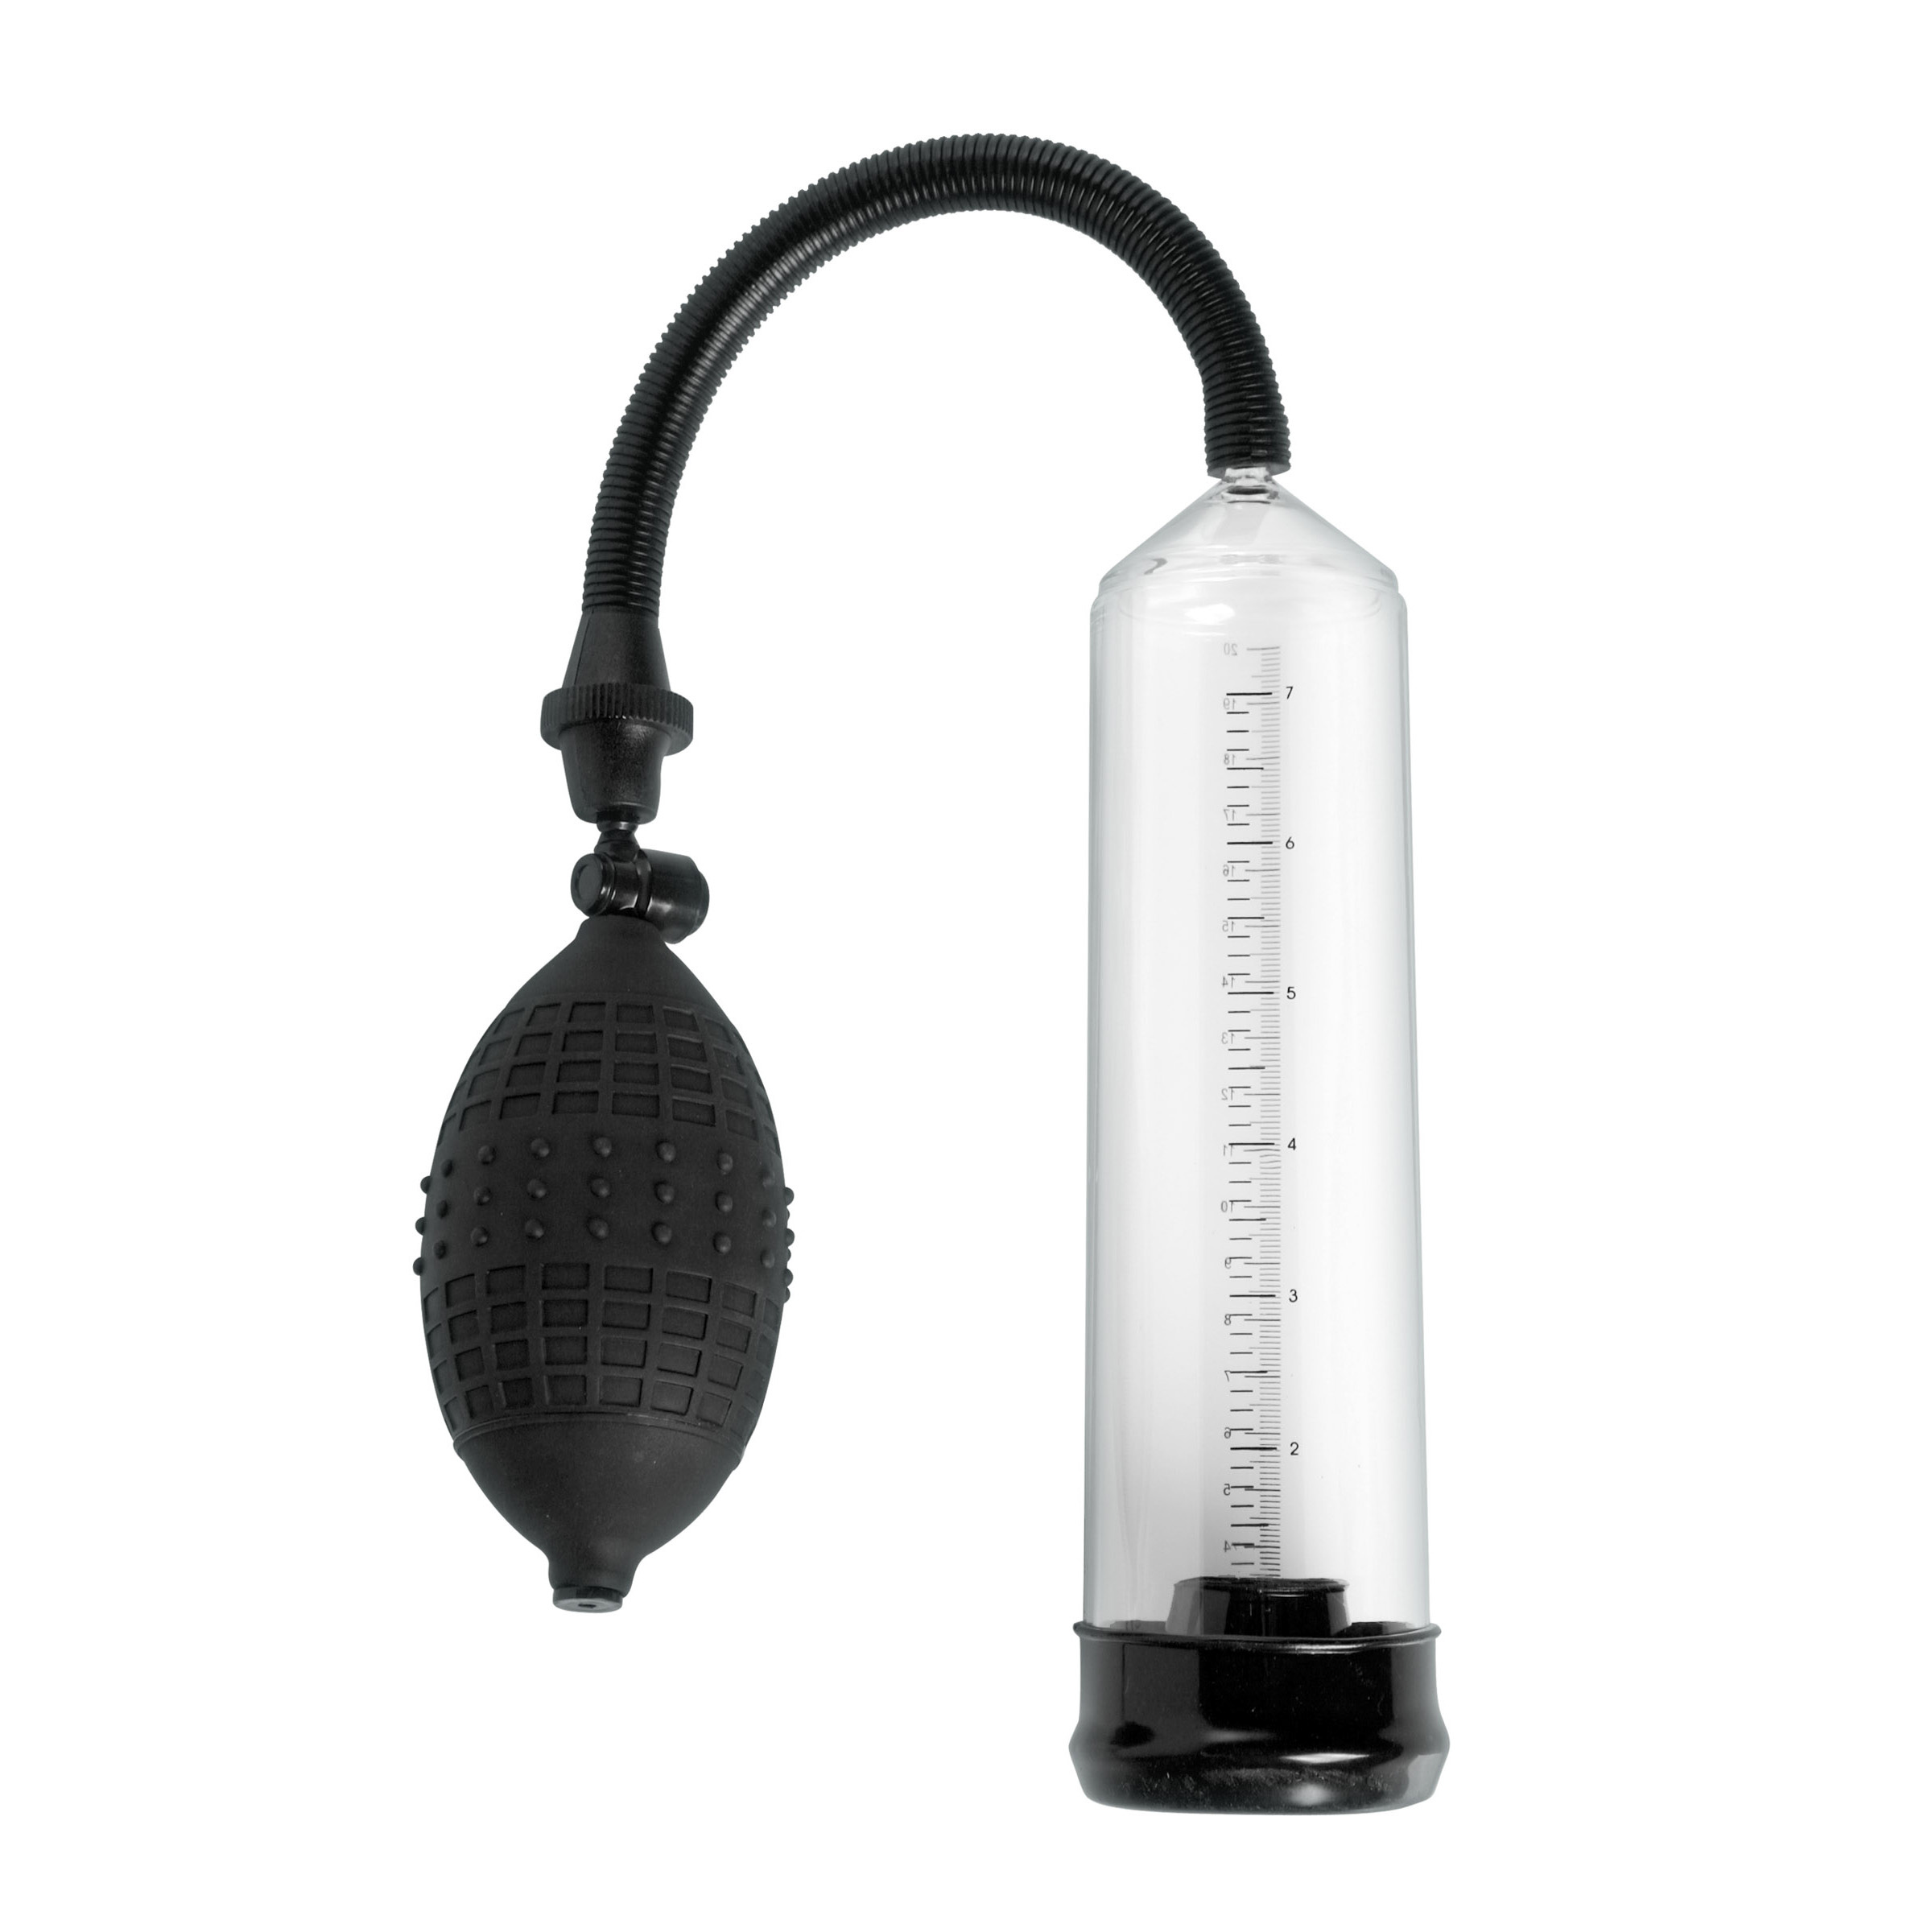 Super Suction Penis Pump with Sleeve